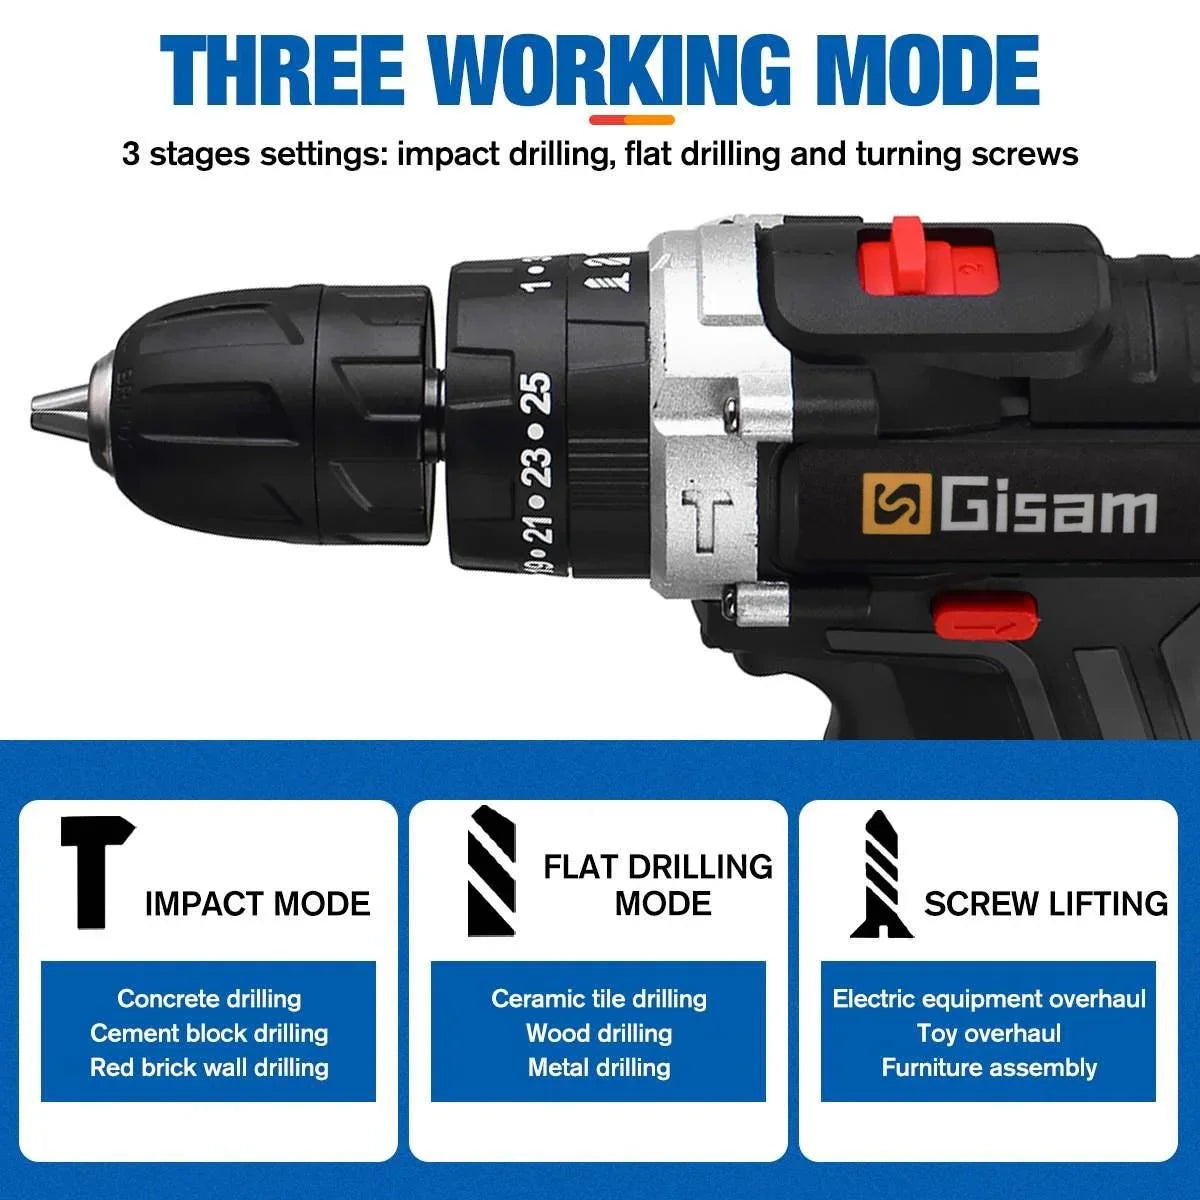 Gisam 88VF Electric Impact Drill Cordless Electric Screwdriver Drill Rechargeable Lithium Battery 2 Speeds Household Power Tools  ourlum.com   